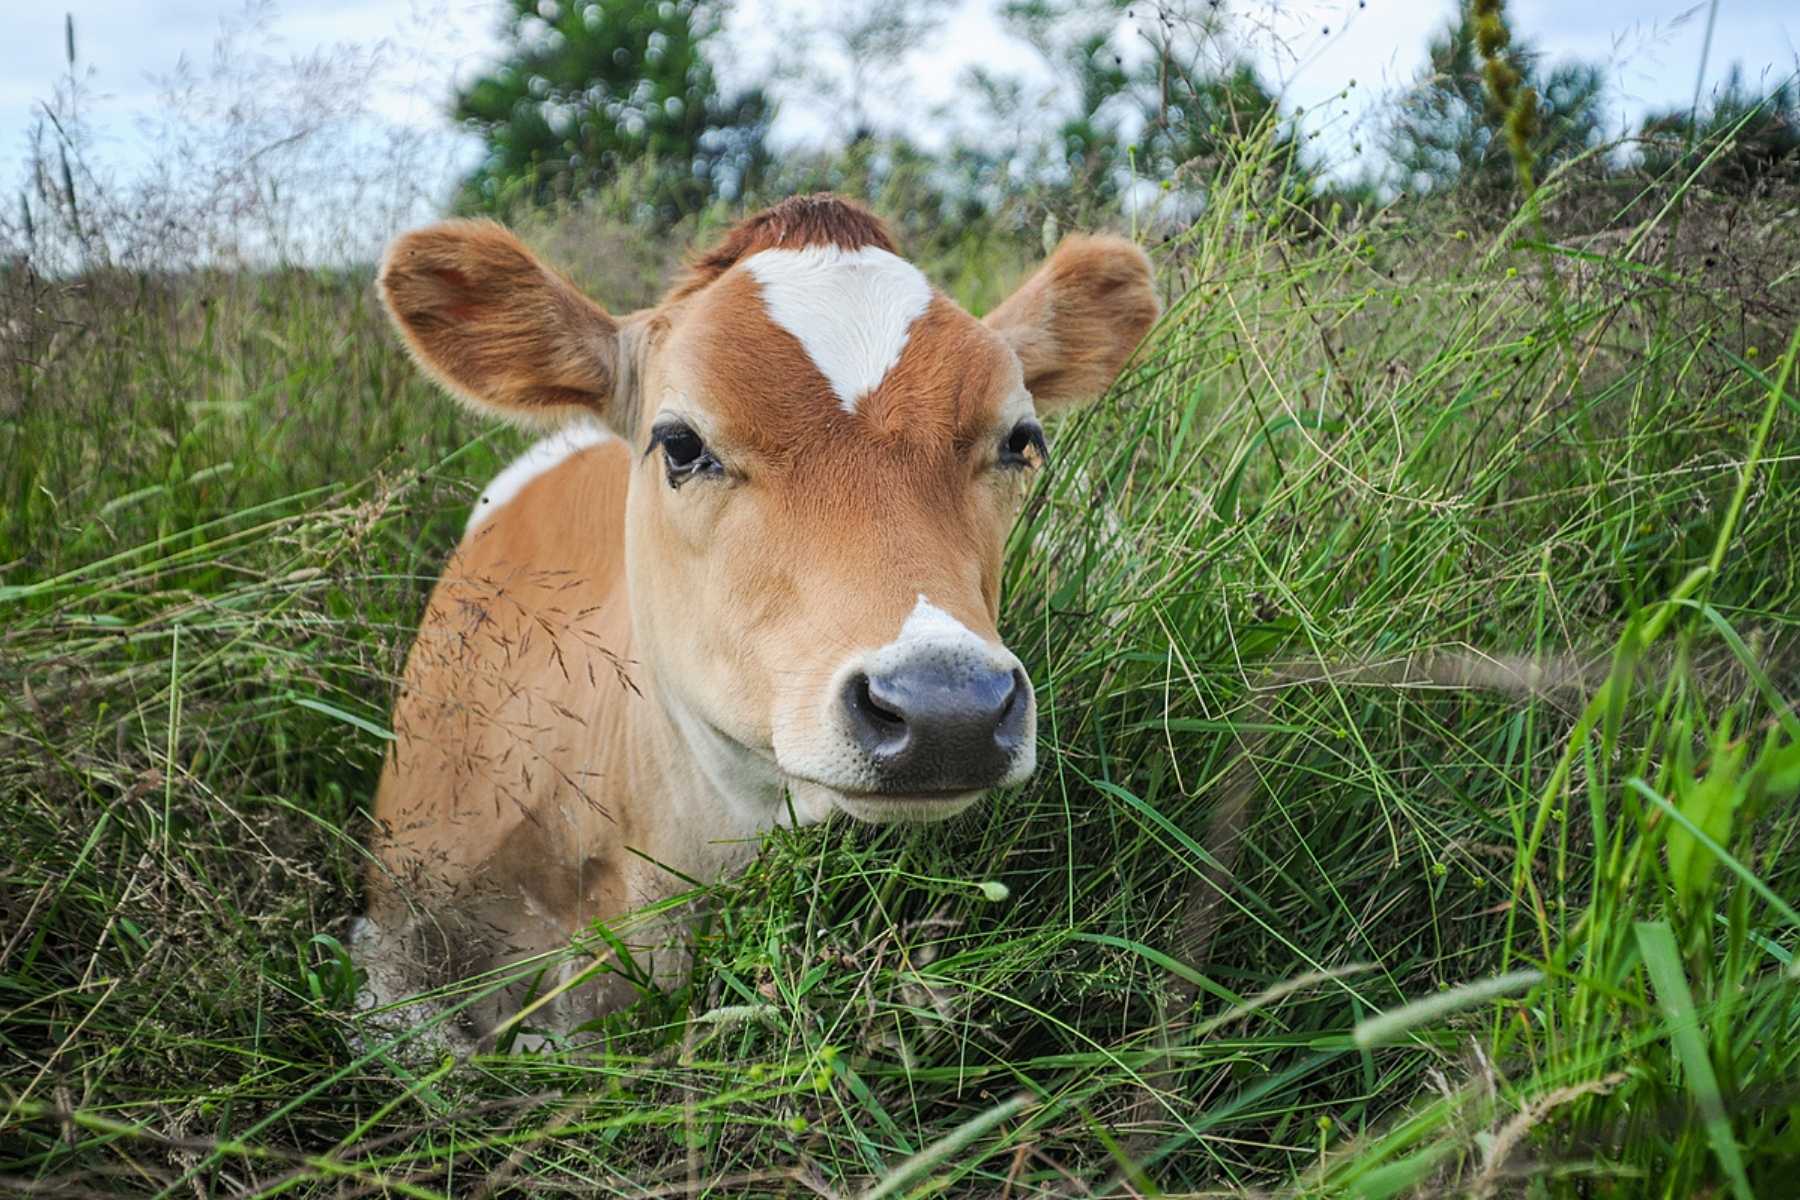 A rescued calf in the cow pasture at Farm Sanctuary.